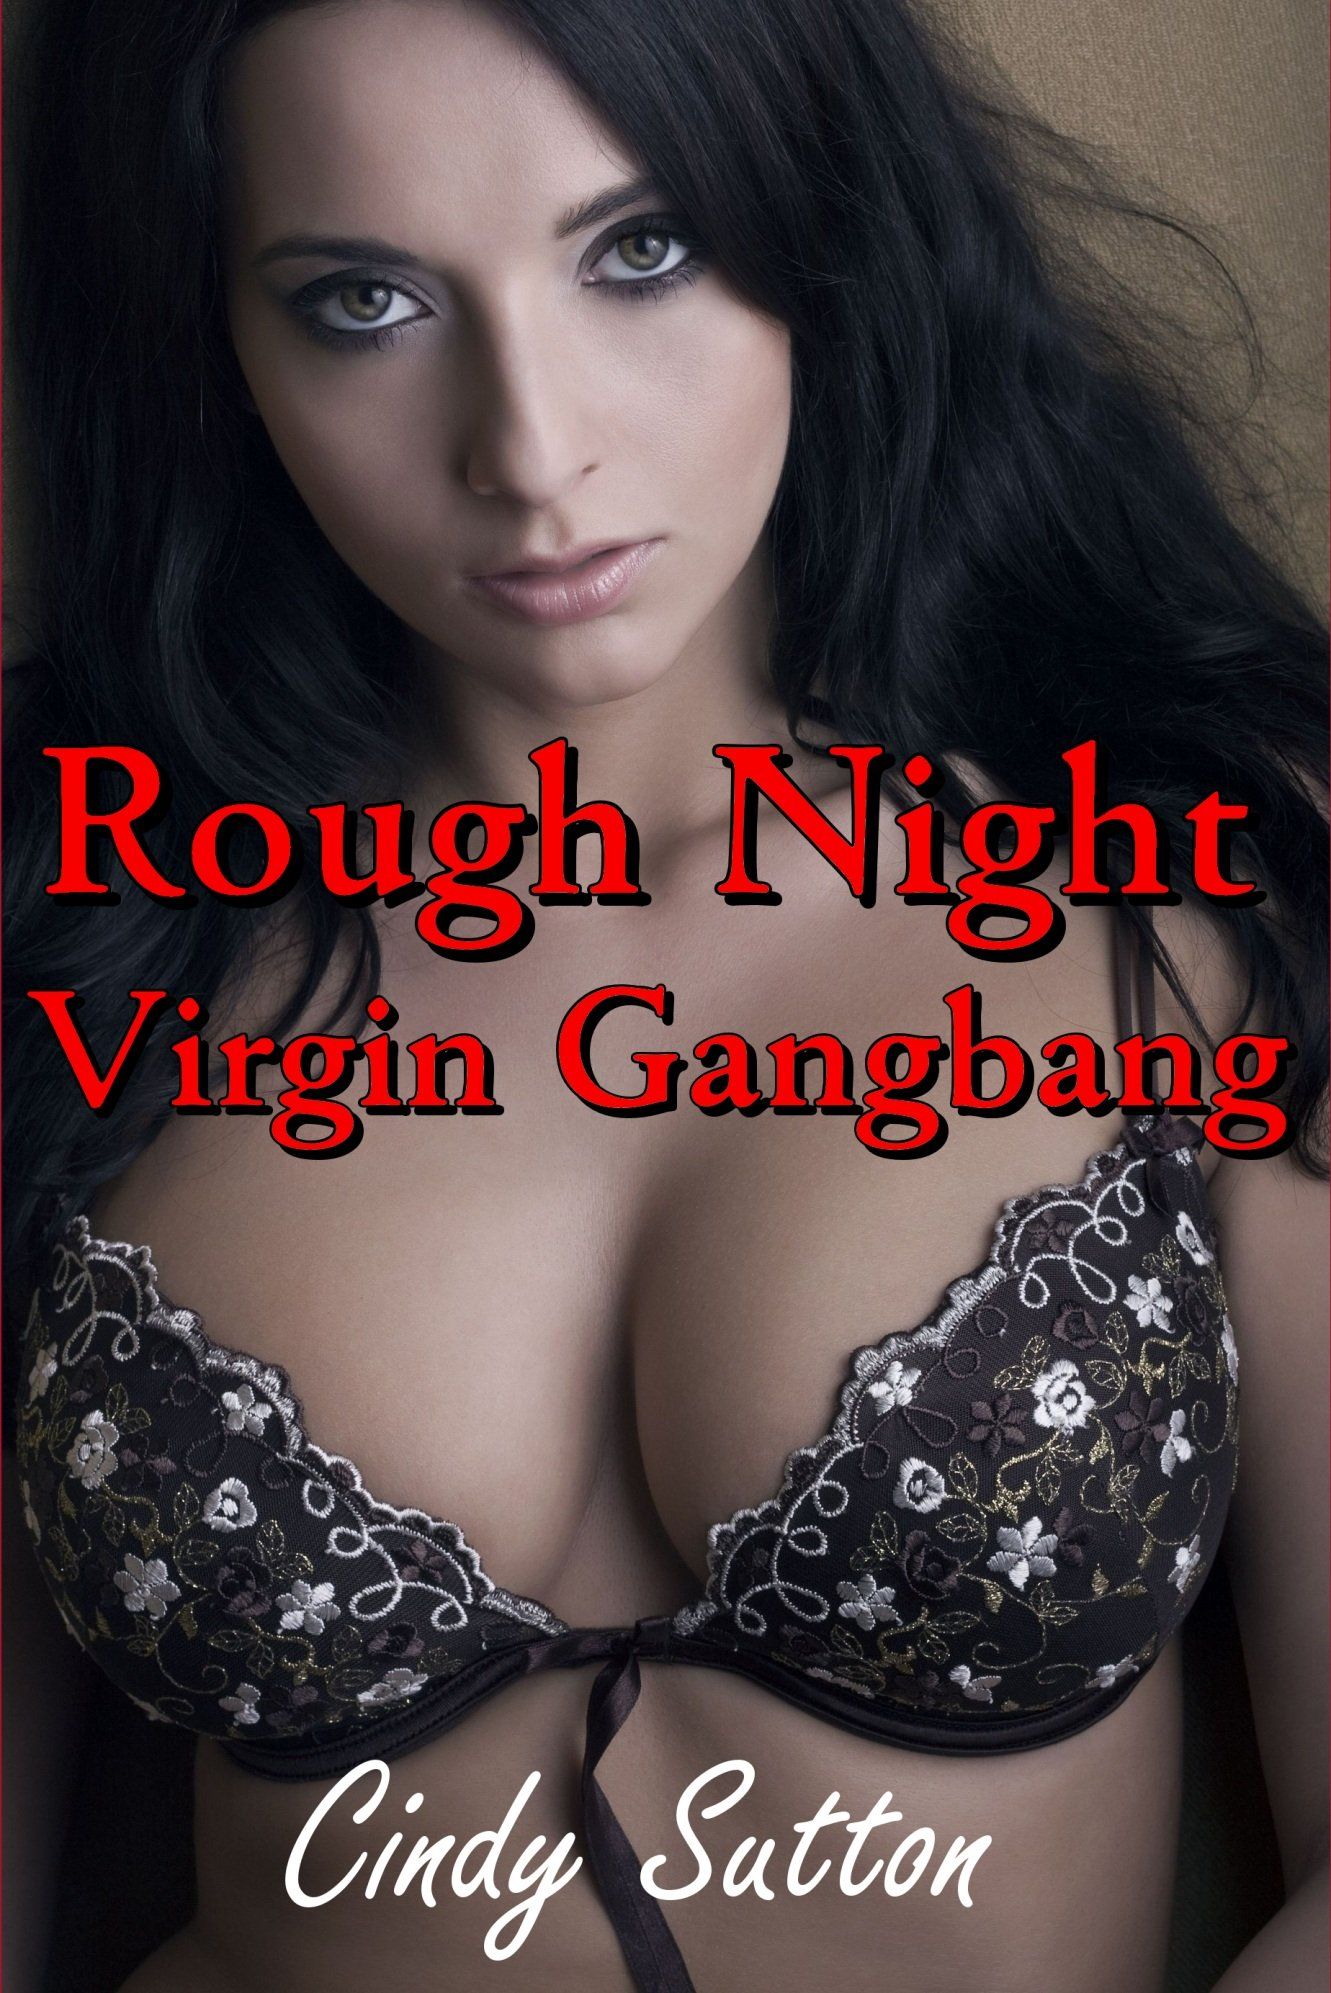 Reluctant wife interracial gangbang stories